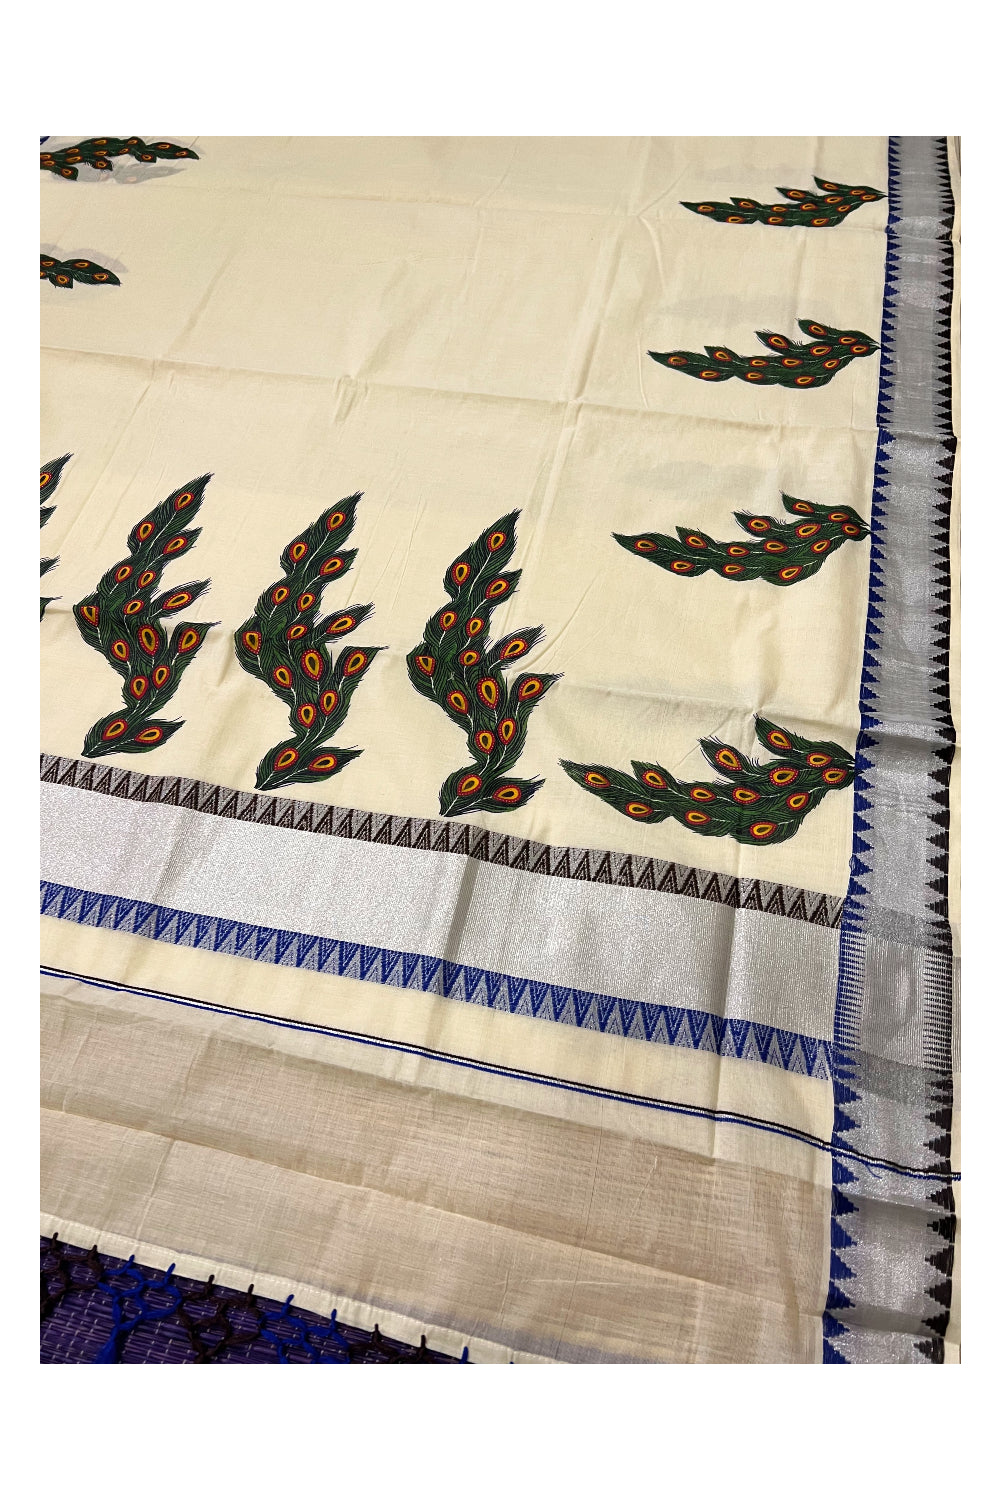 Kerala Pure Cotton Saree with Mural Printed Feather Design and Blue Brown Temple Border